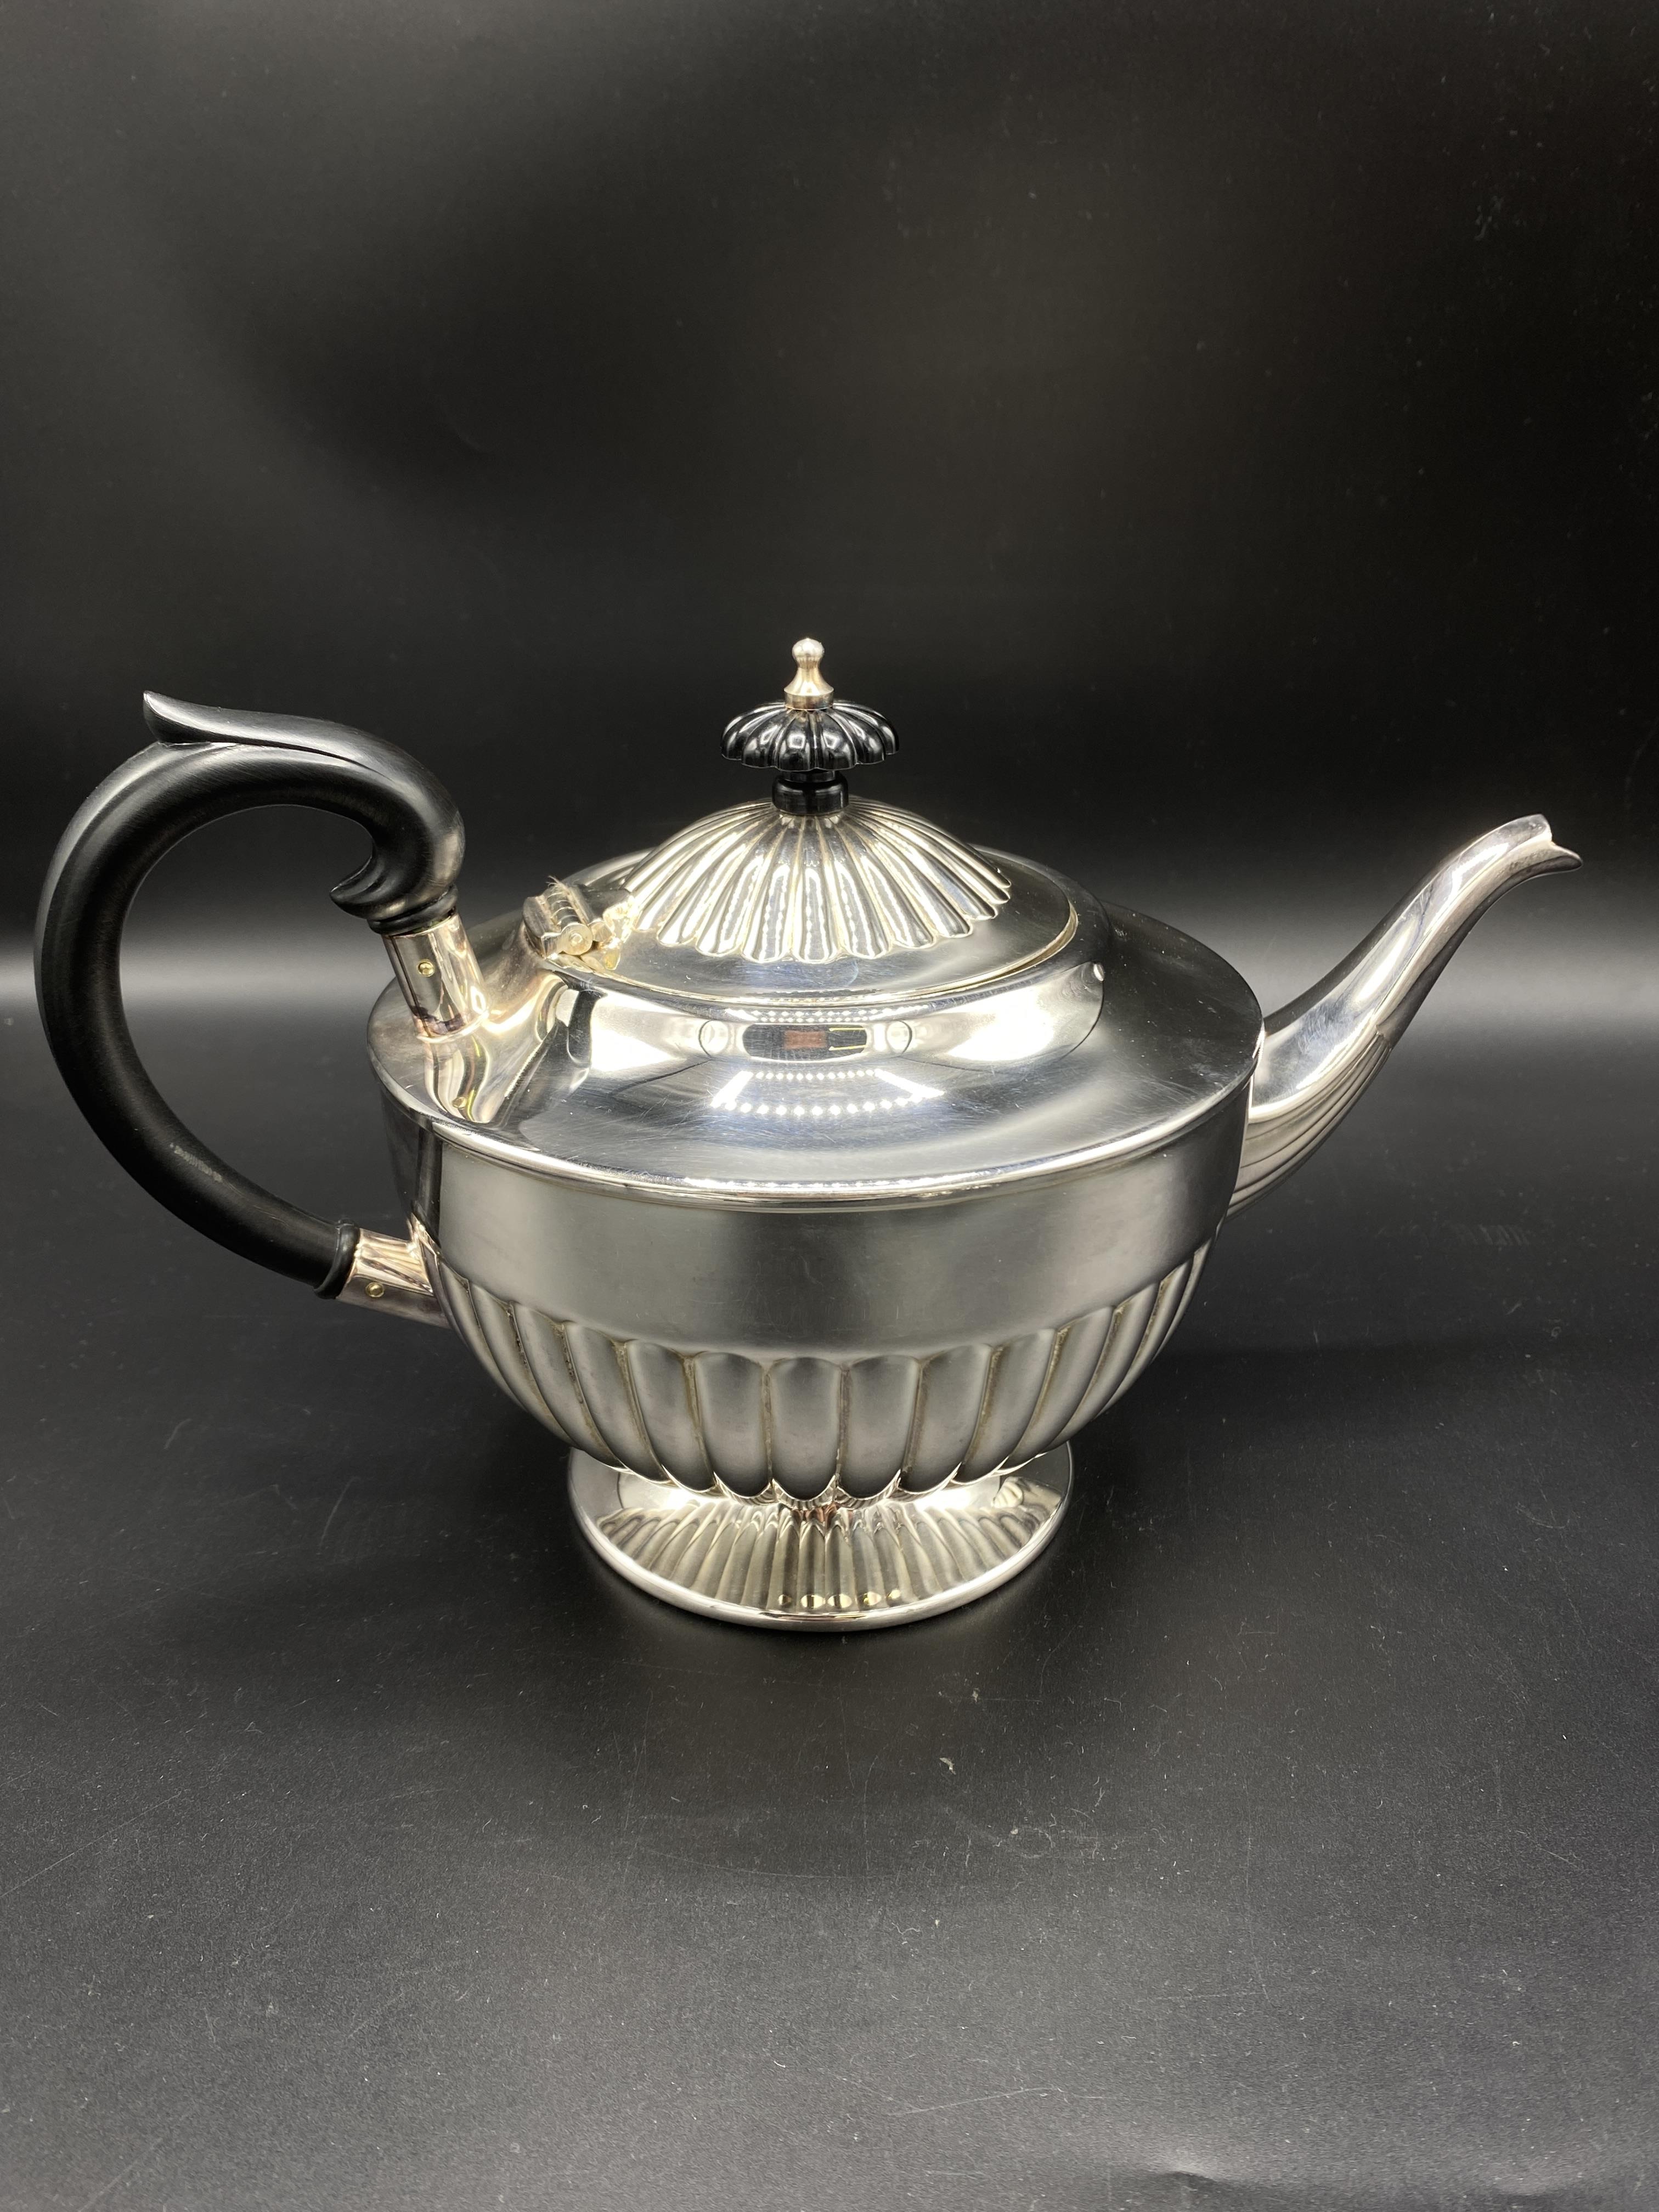 Mappin & Webb silver plate tea and coffee set - Image 5 of 11